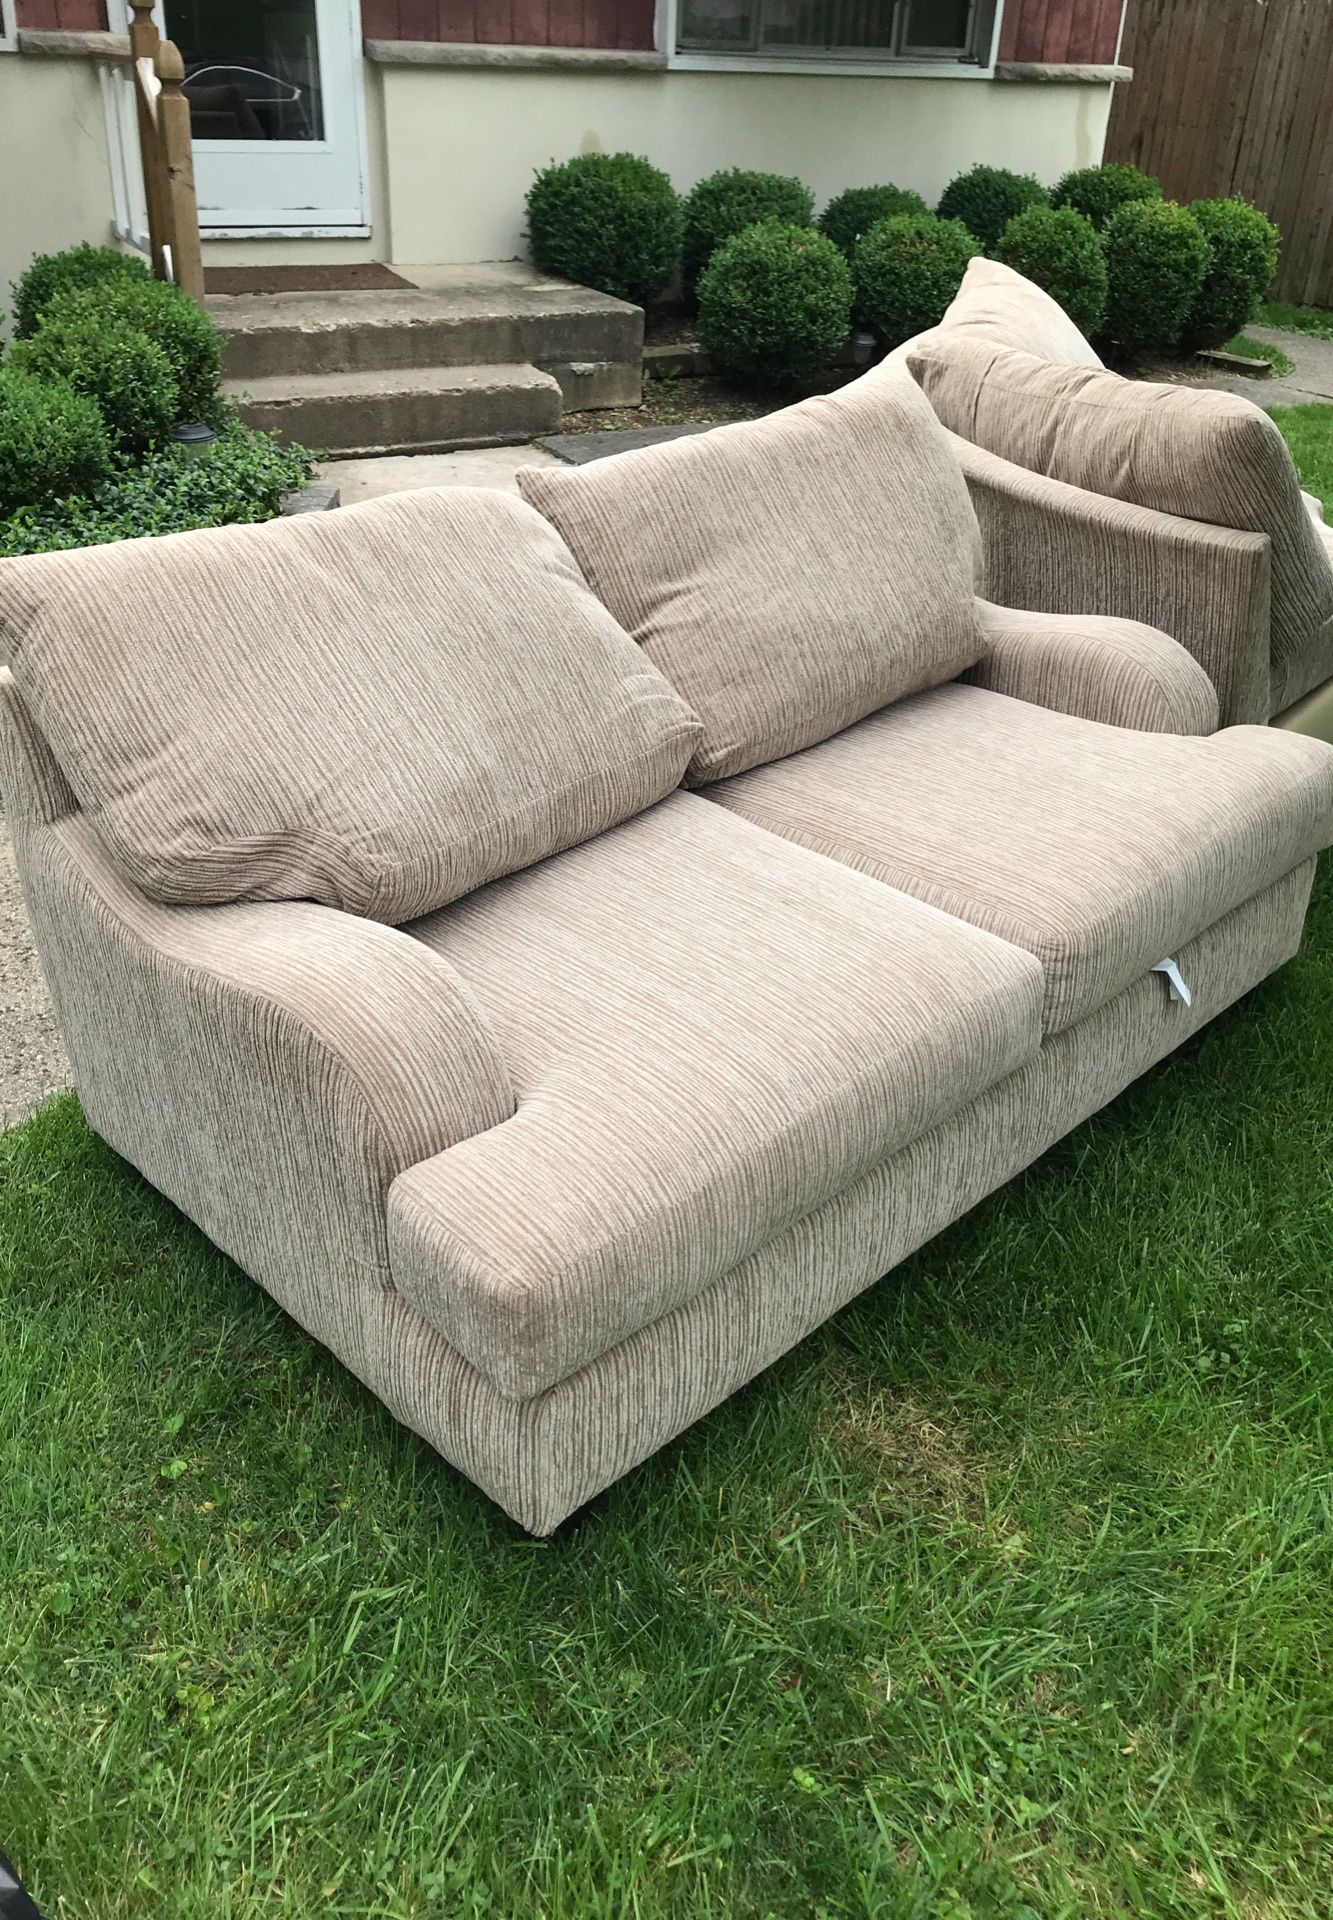 2 large sectional piece couches. Today only... Eastside, Eastmoor/Bexley